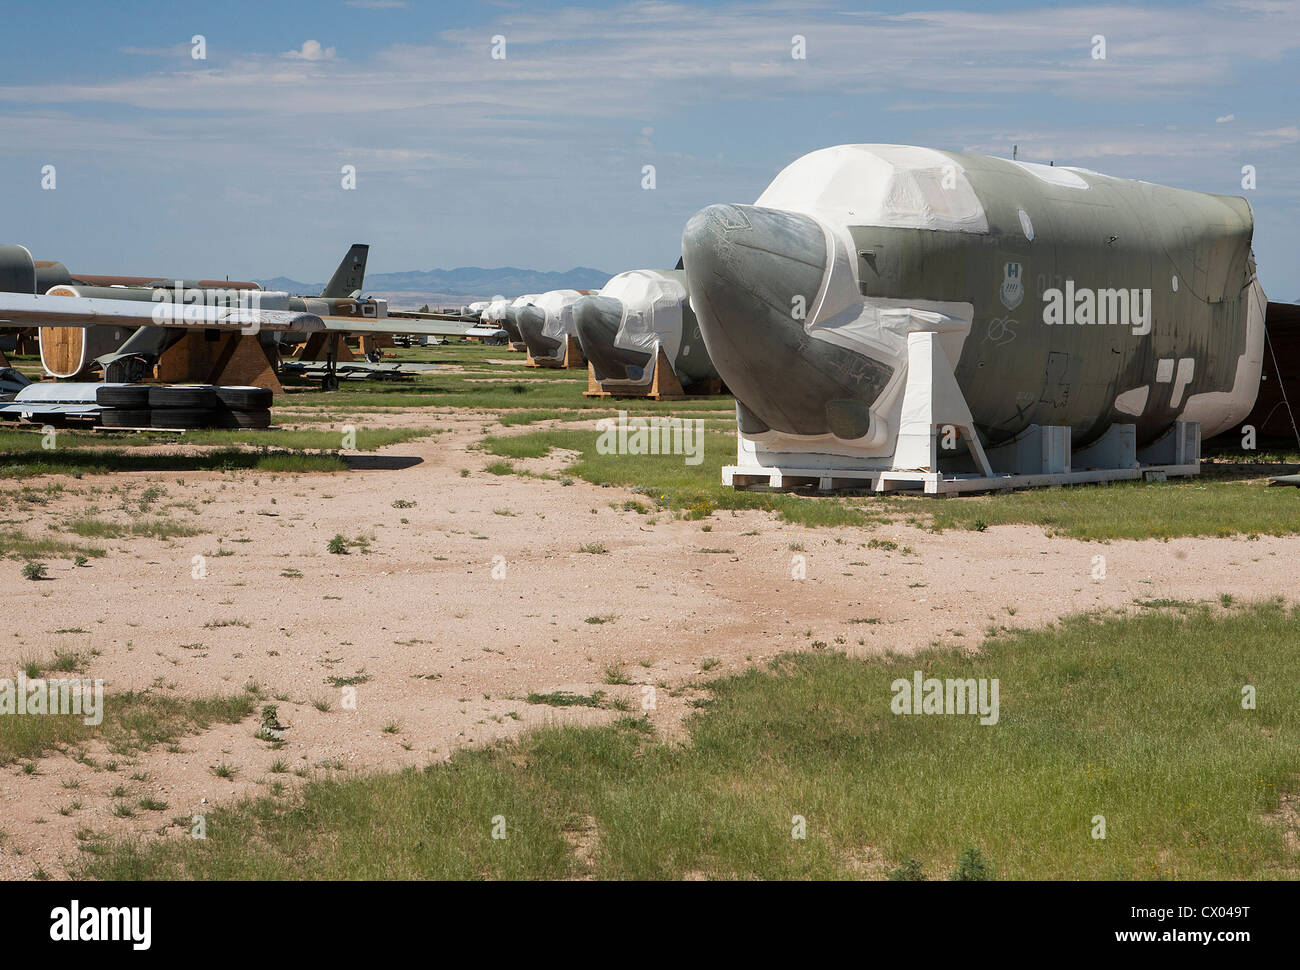 B-52 Stratofortress aircraft in storage at the 309th Aerospace Maintenance and Regeneration Group at Davis-Monthan AFB. Stock Photo